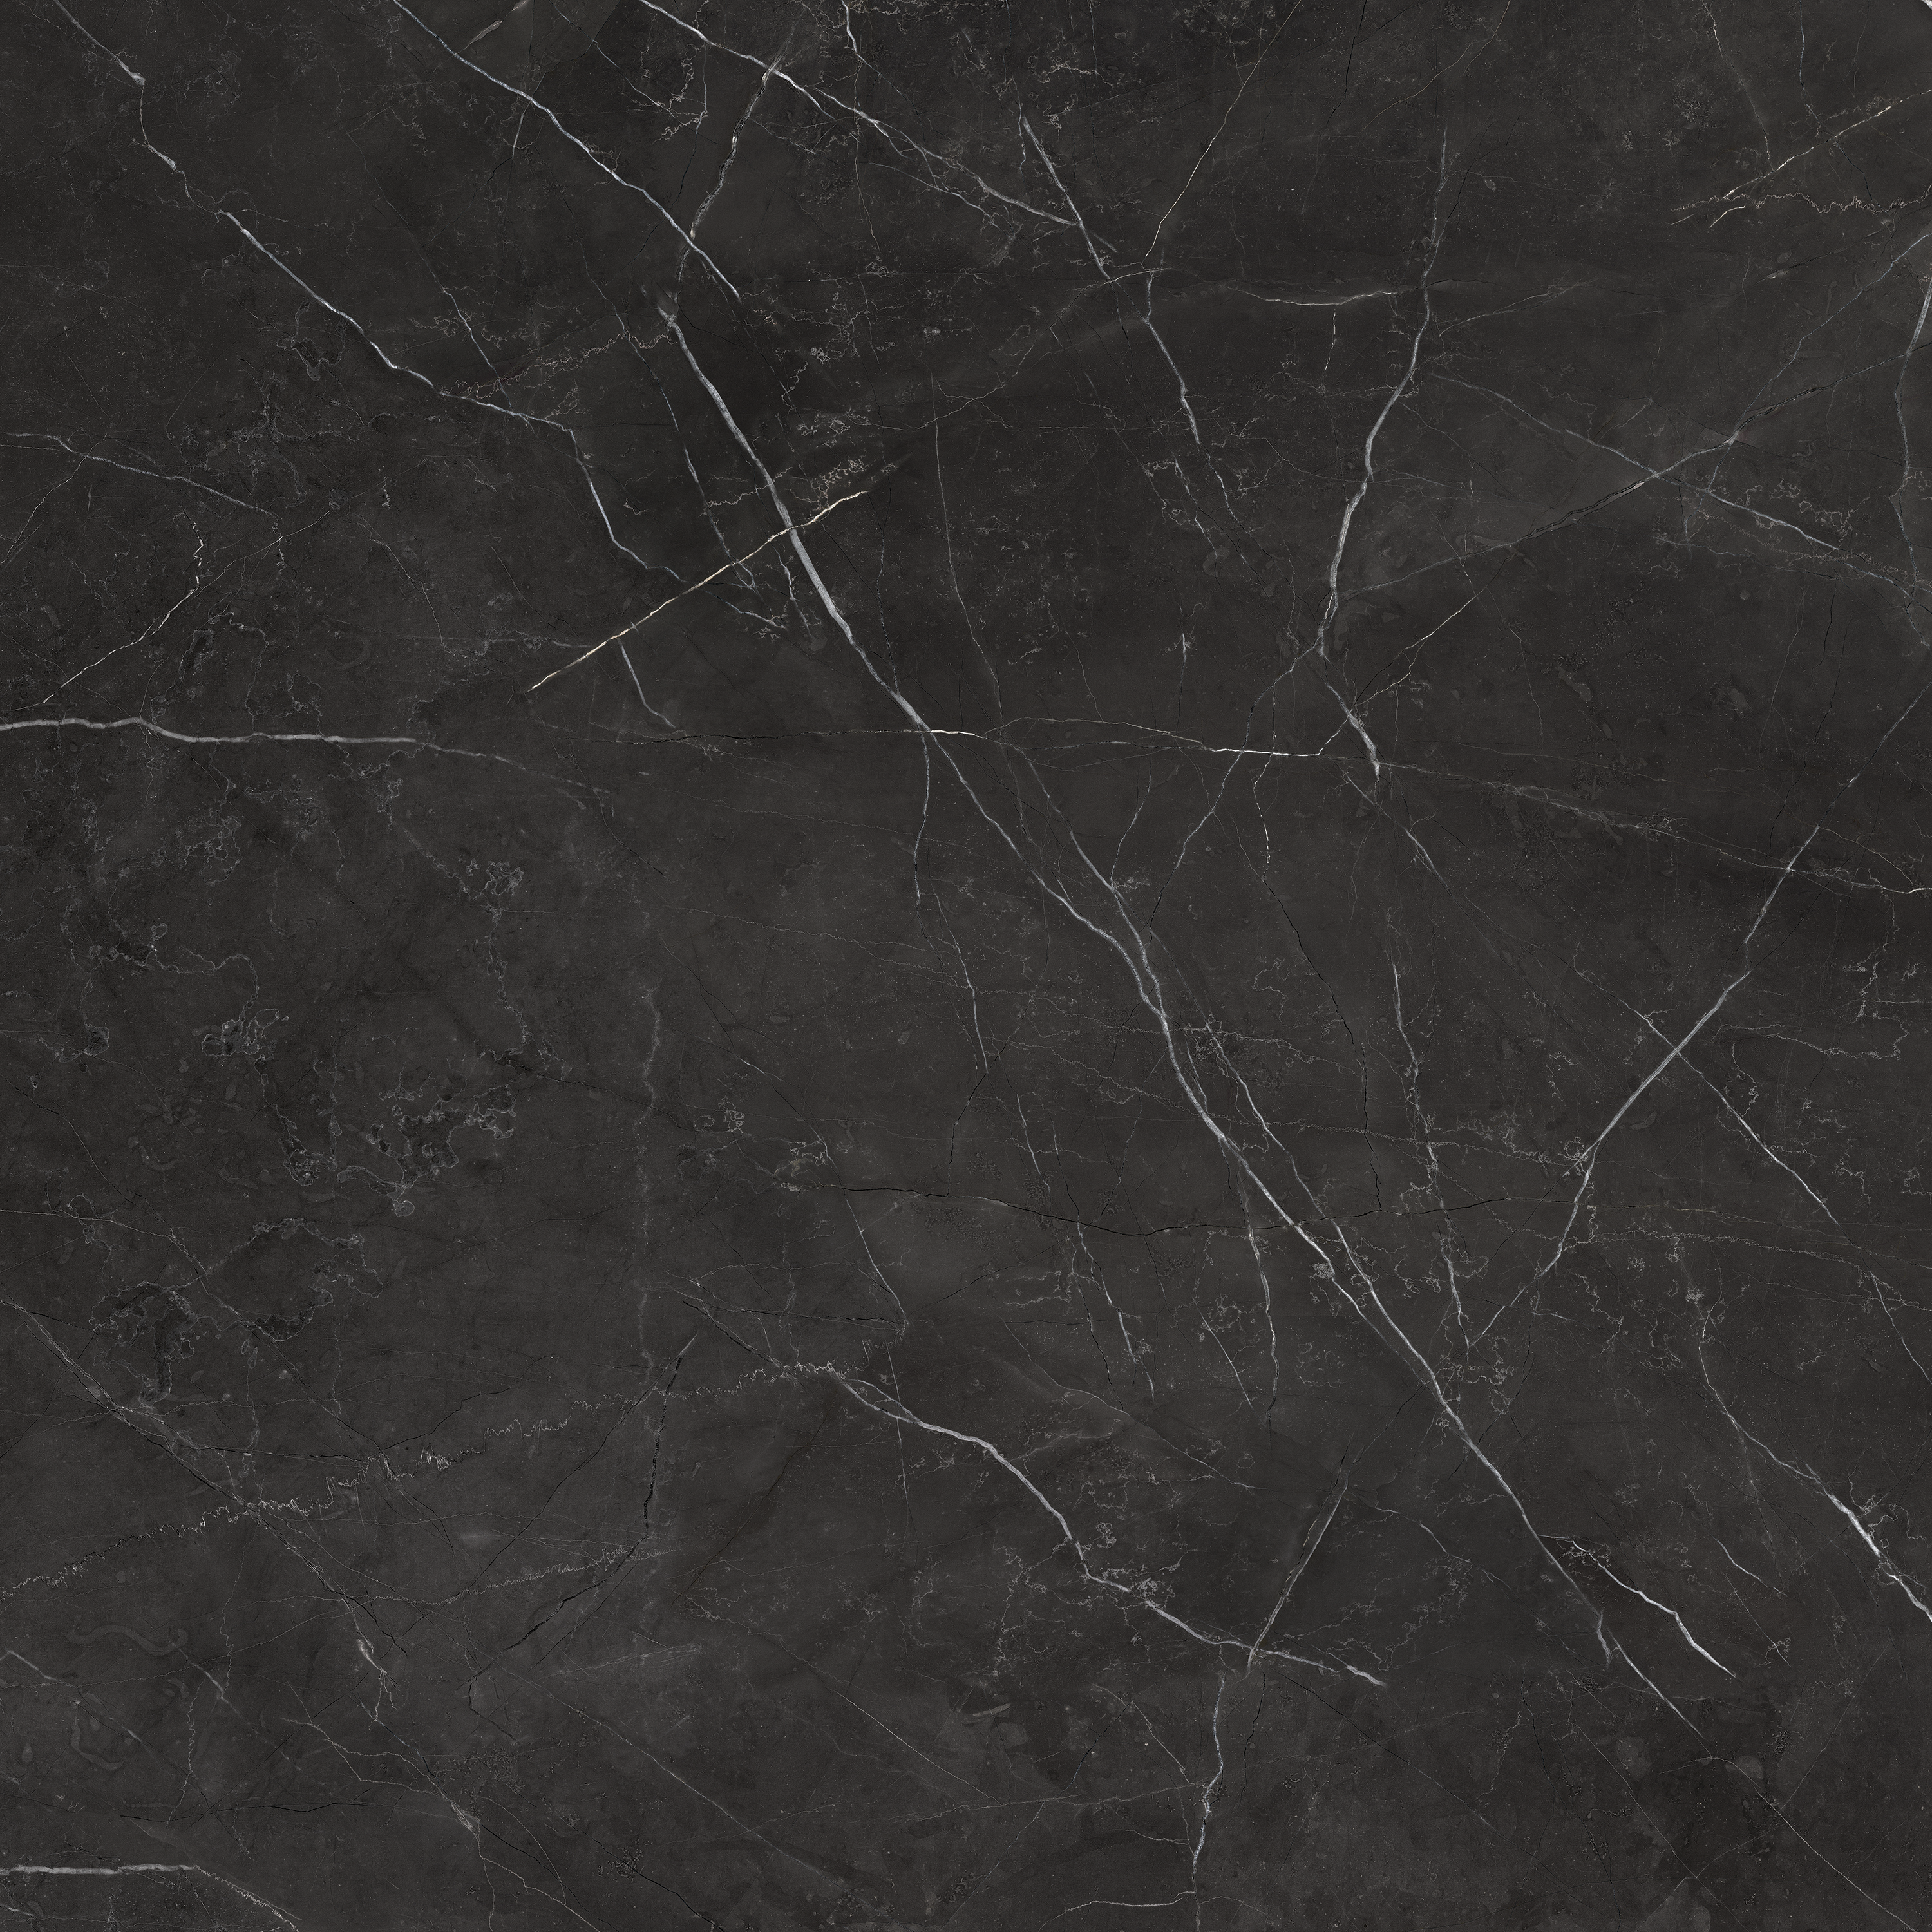 nero venato pattern glazed porcelain field tile from la marca anatolia collection distributed by surface group international honed finish rectified edge 32x32 square shape